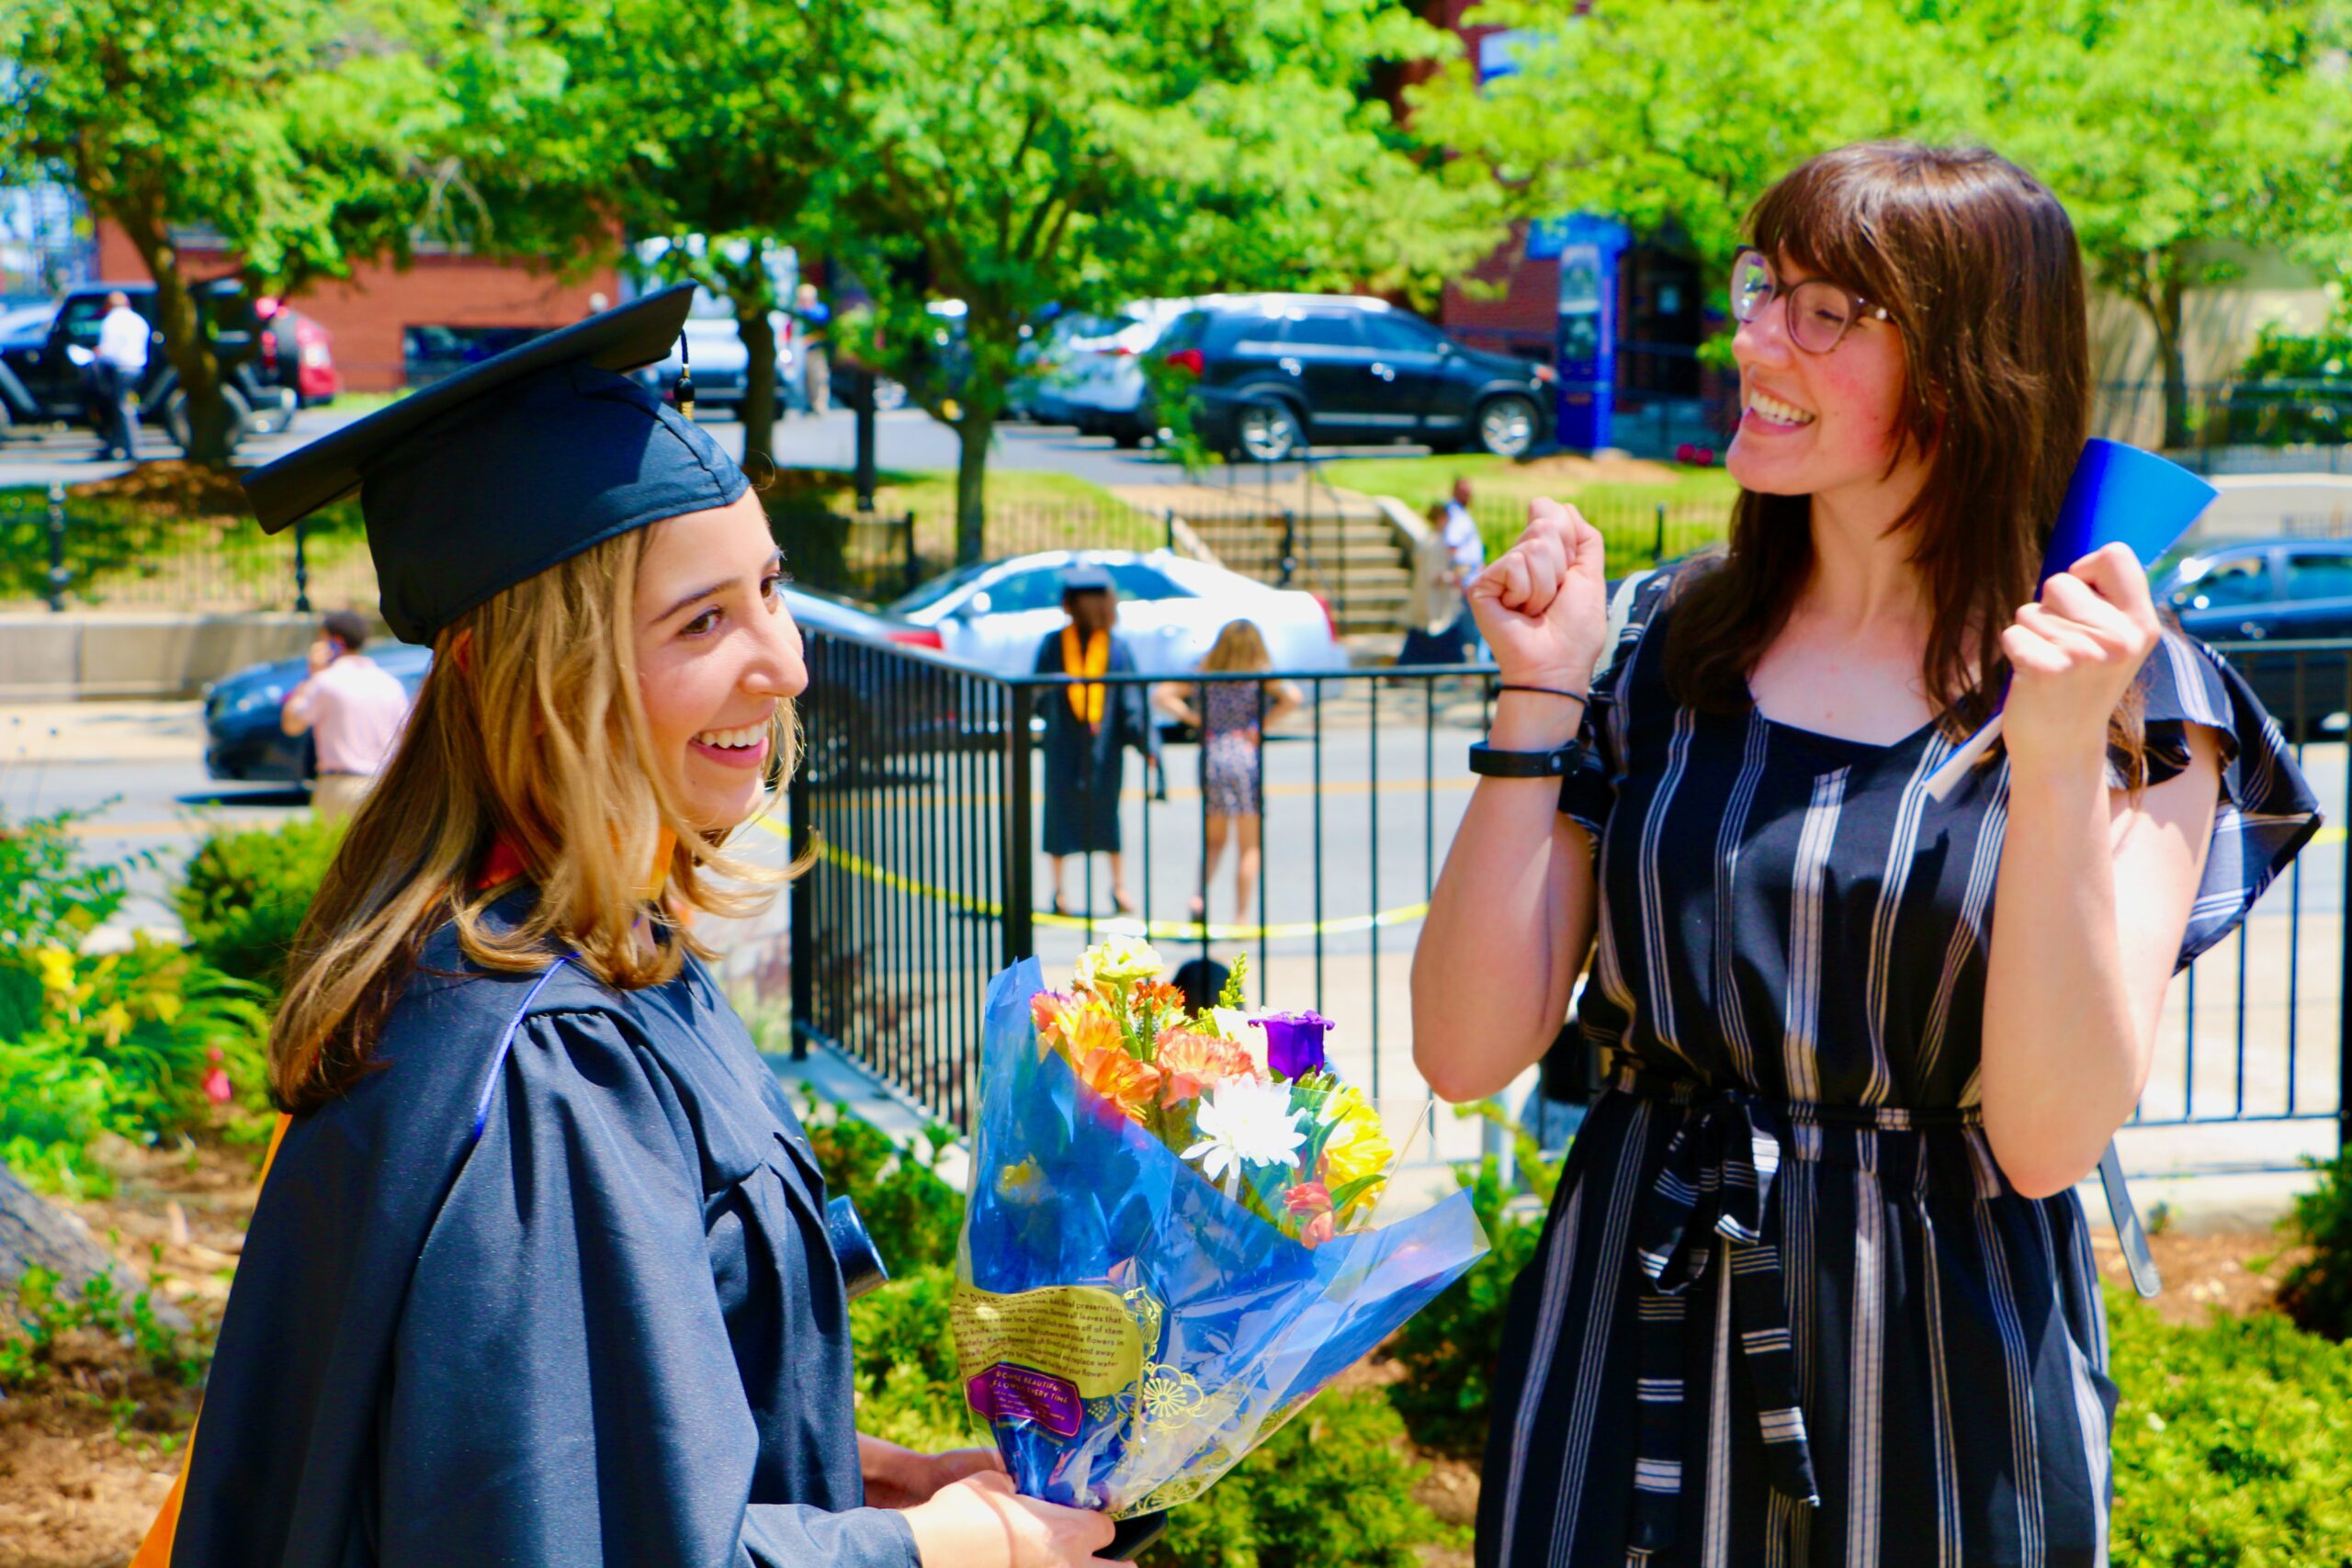 Spalding master's graduate holding flowers talking with friend